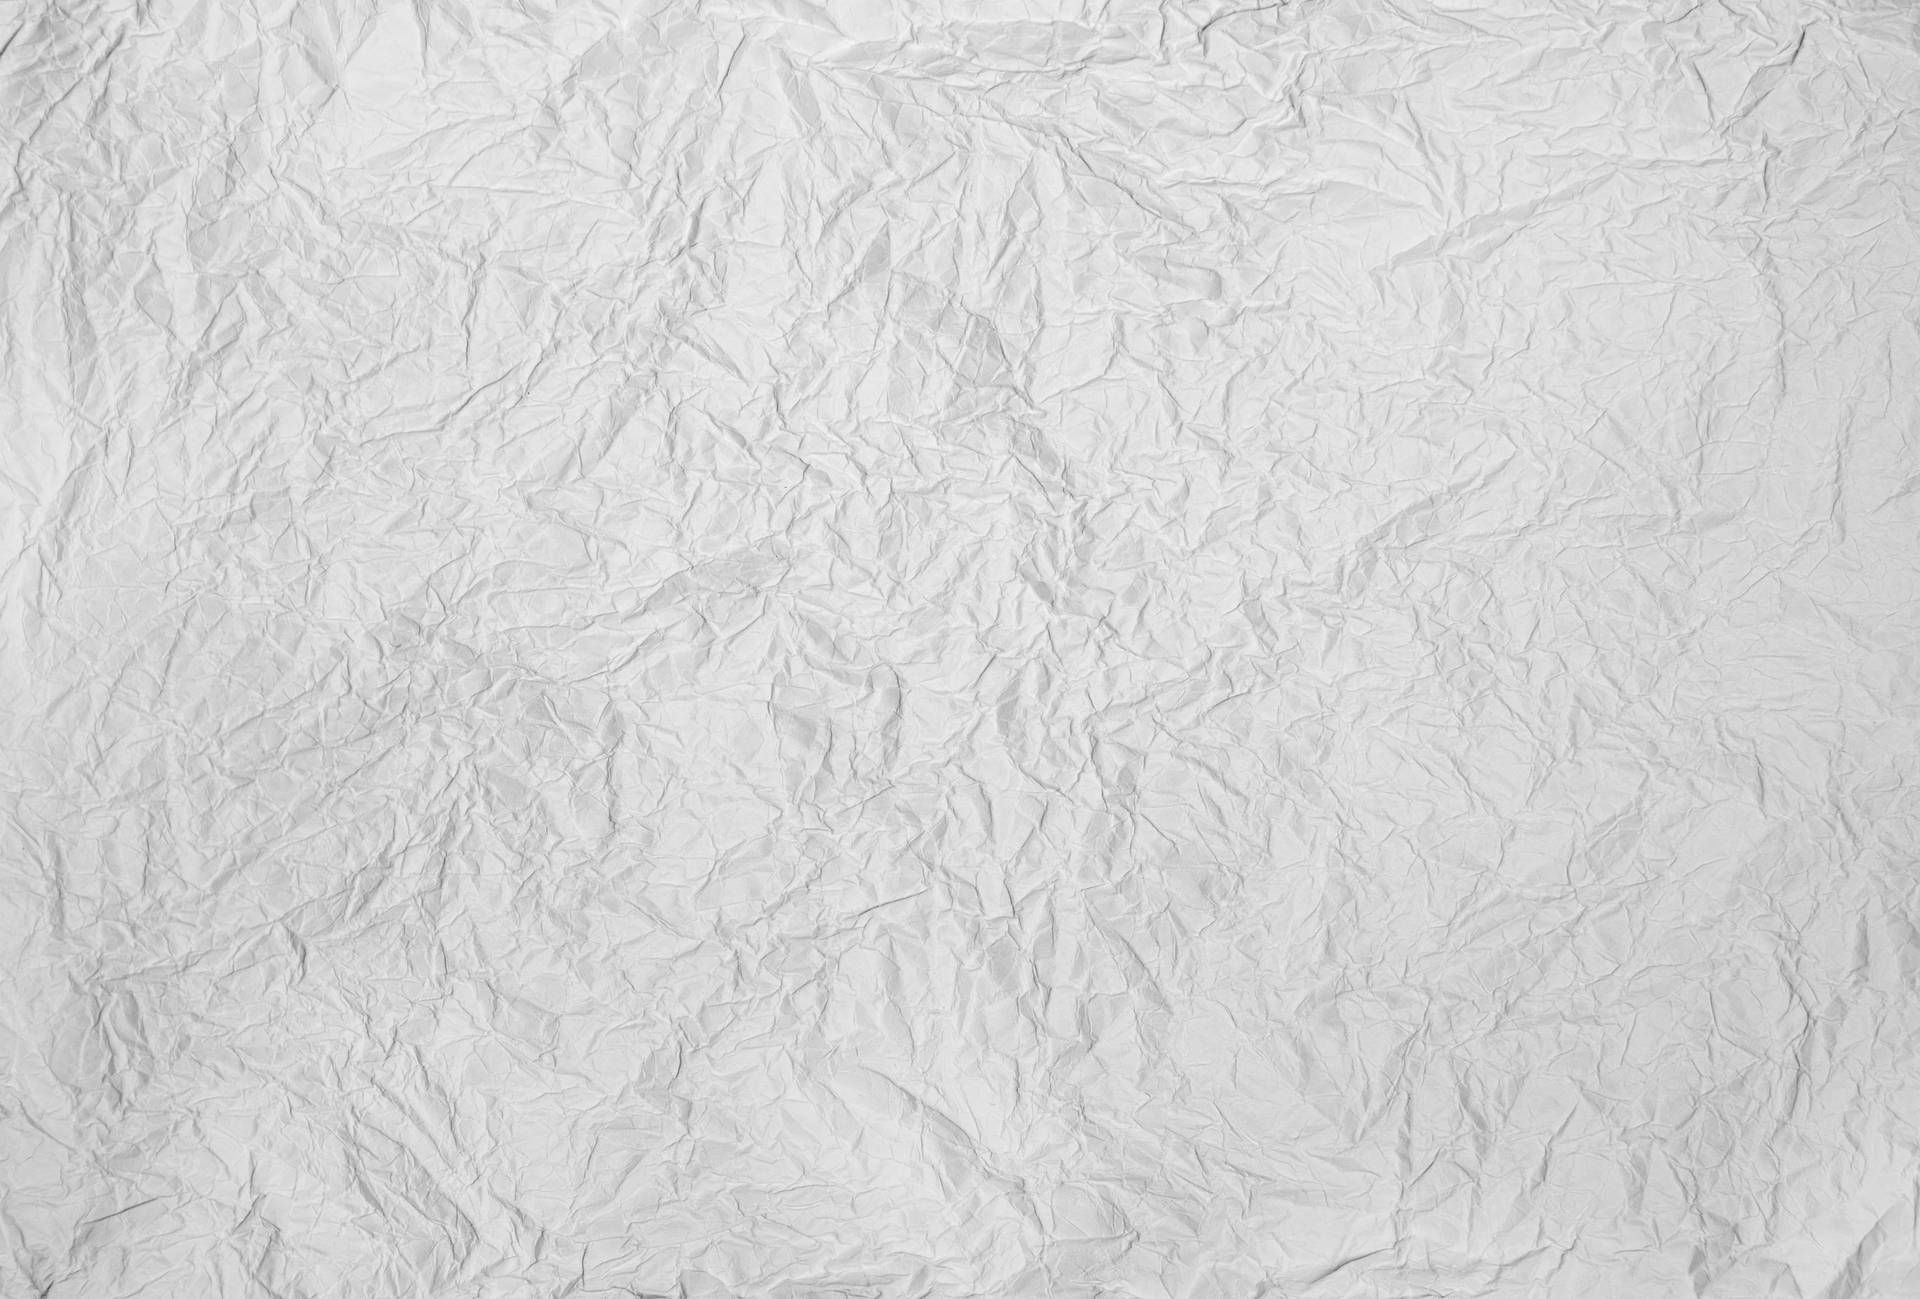 Blank Crumpled Paper Background